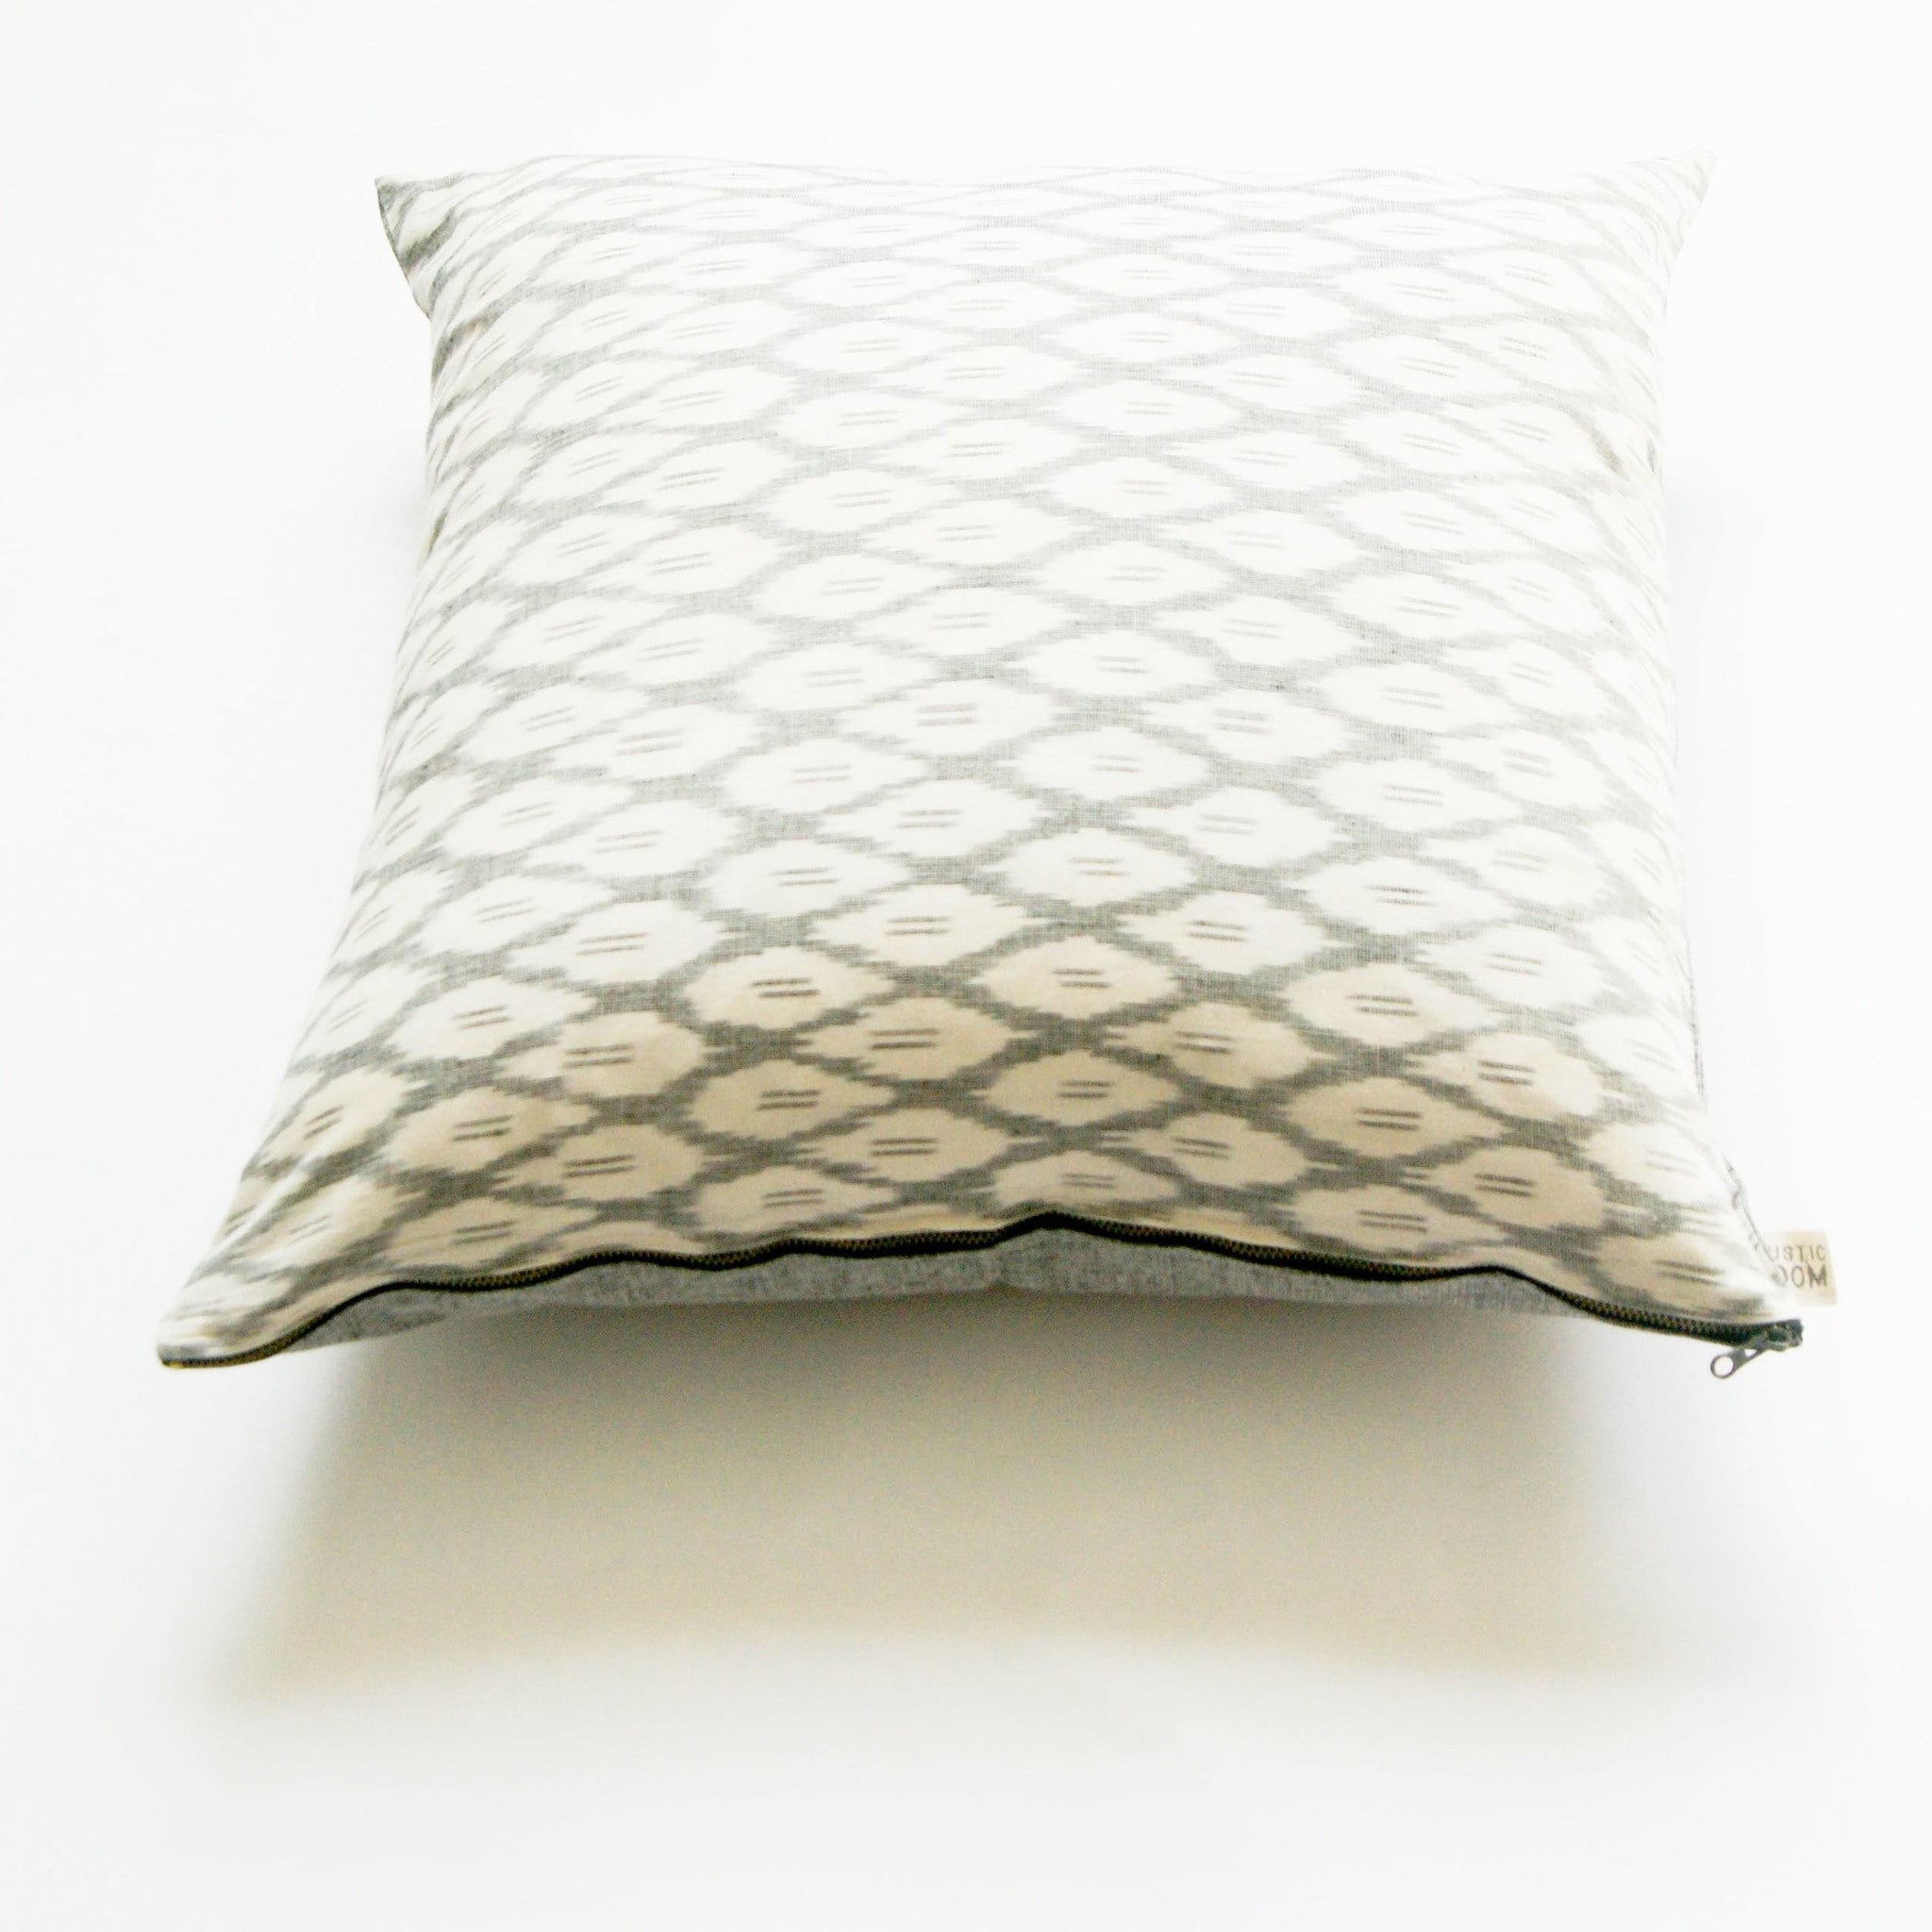 SOLD OUT Woven Cotton Ikat Throw Pillow White Grey Ogee